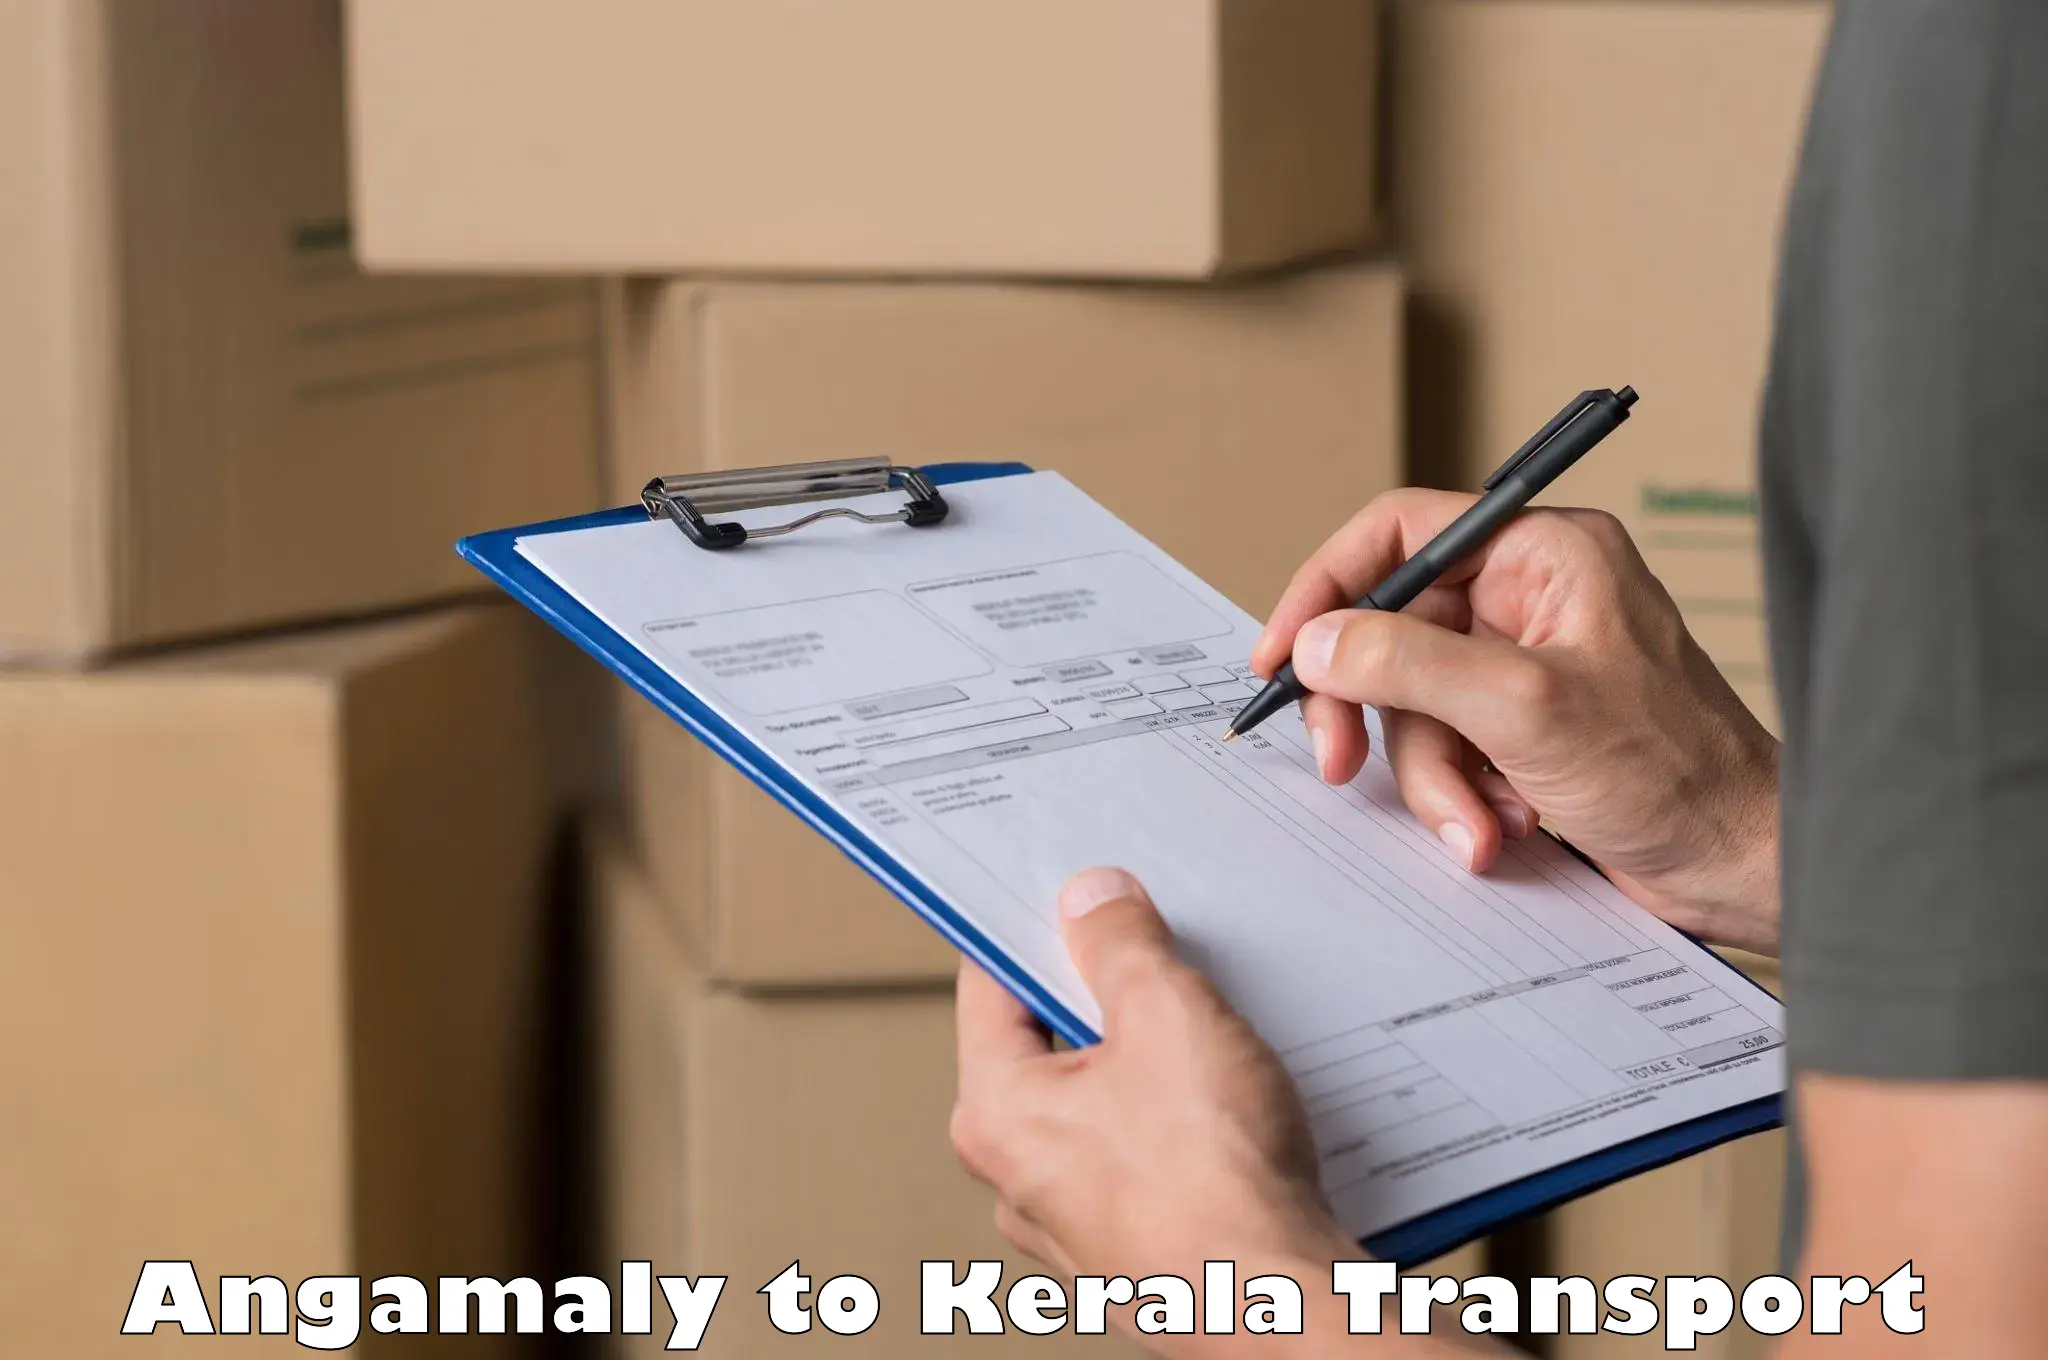 Online transport service Angamaly to Kallachi